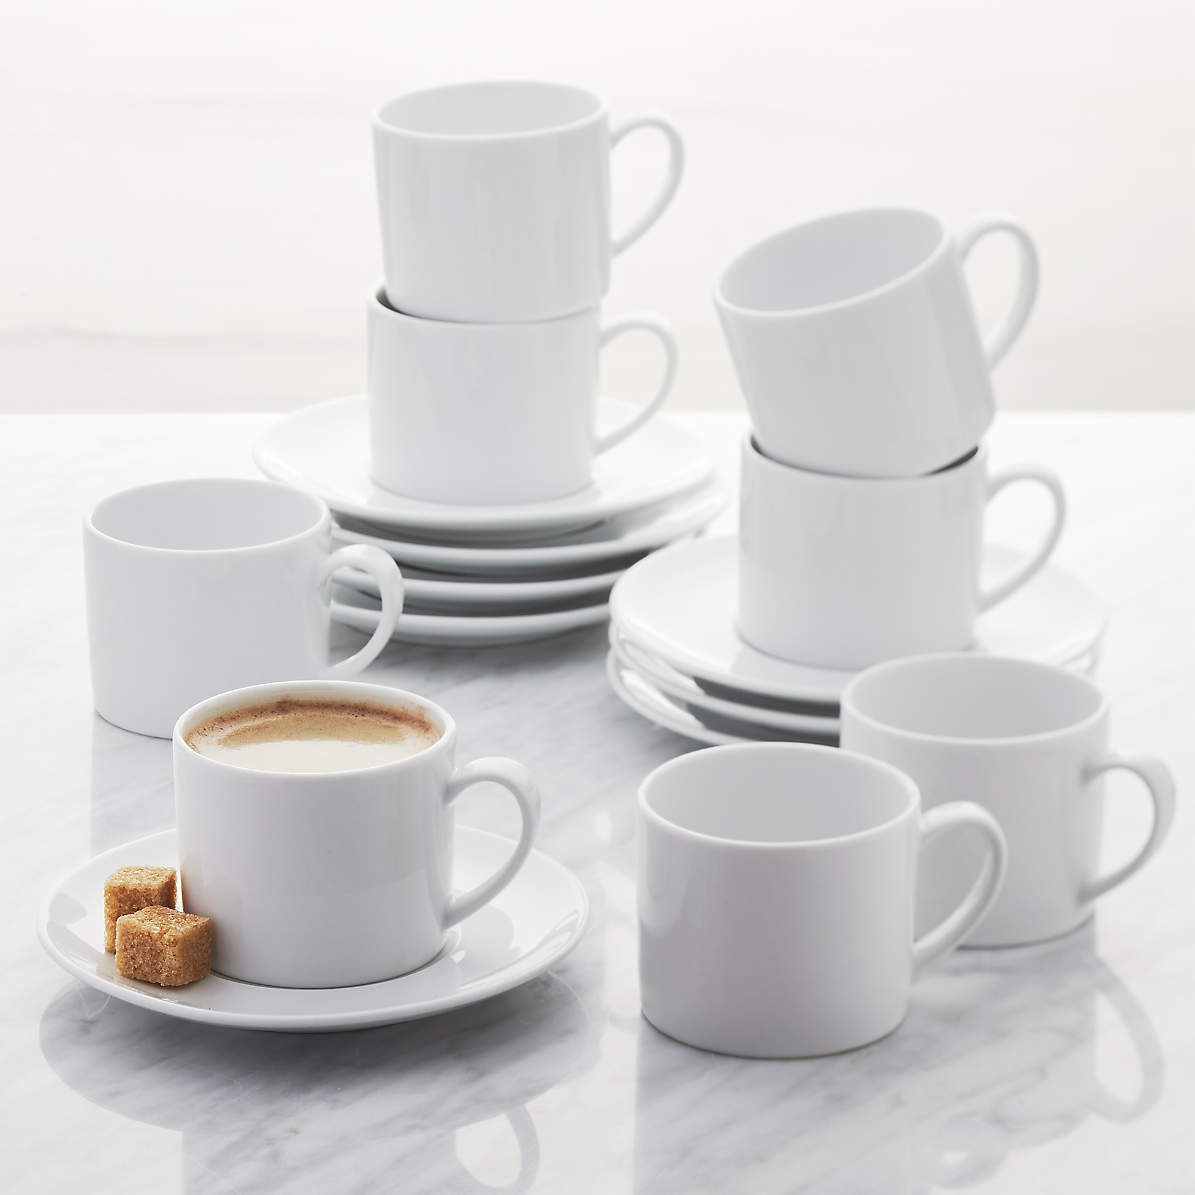 Demitasse Espresso Cup & Saucer Crate & Barrel Solid White Straight Sided 